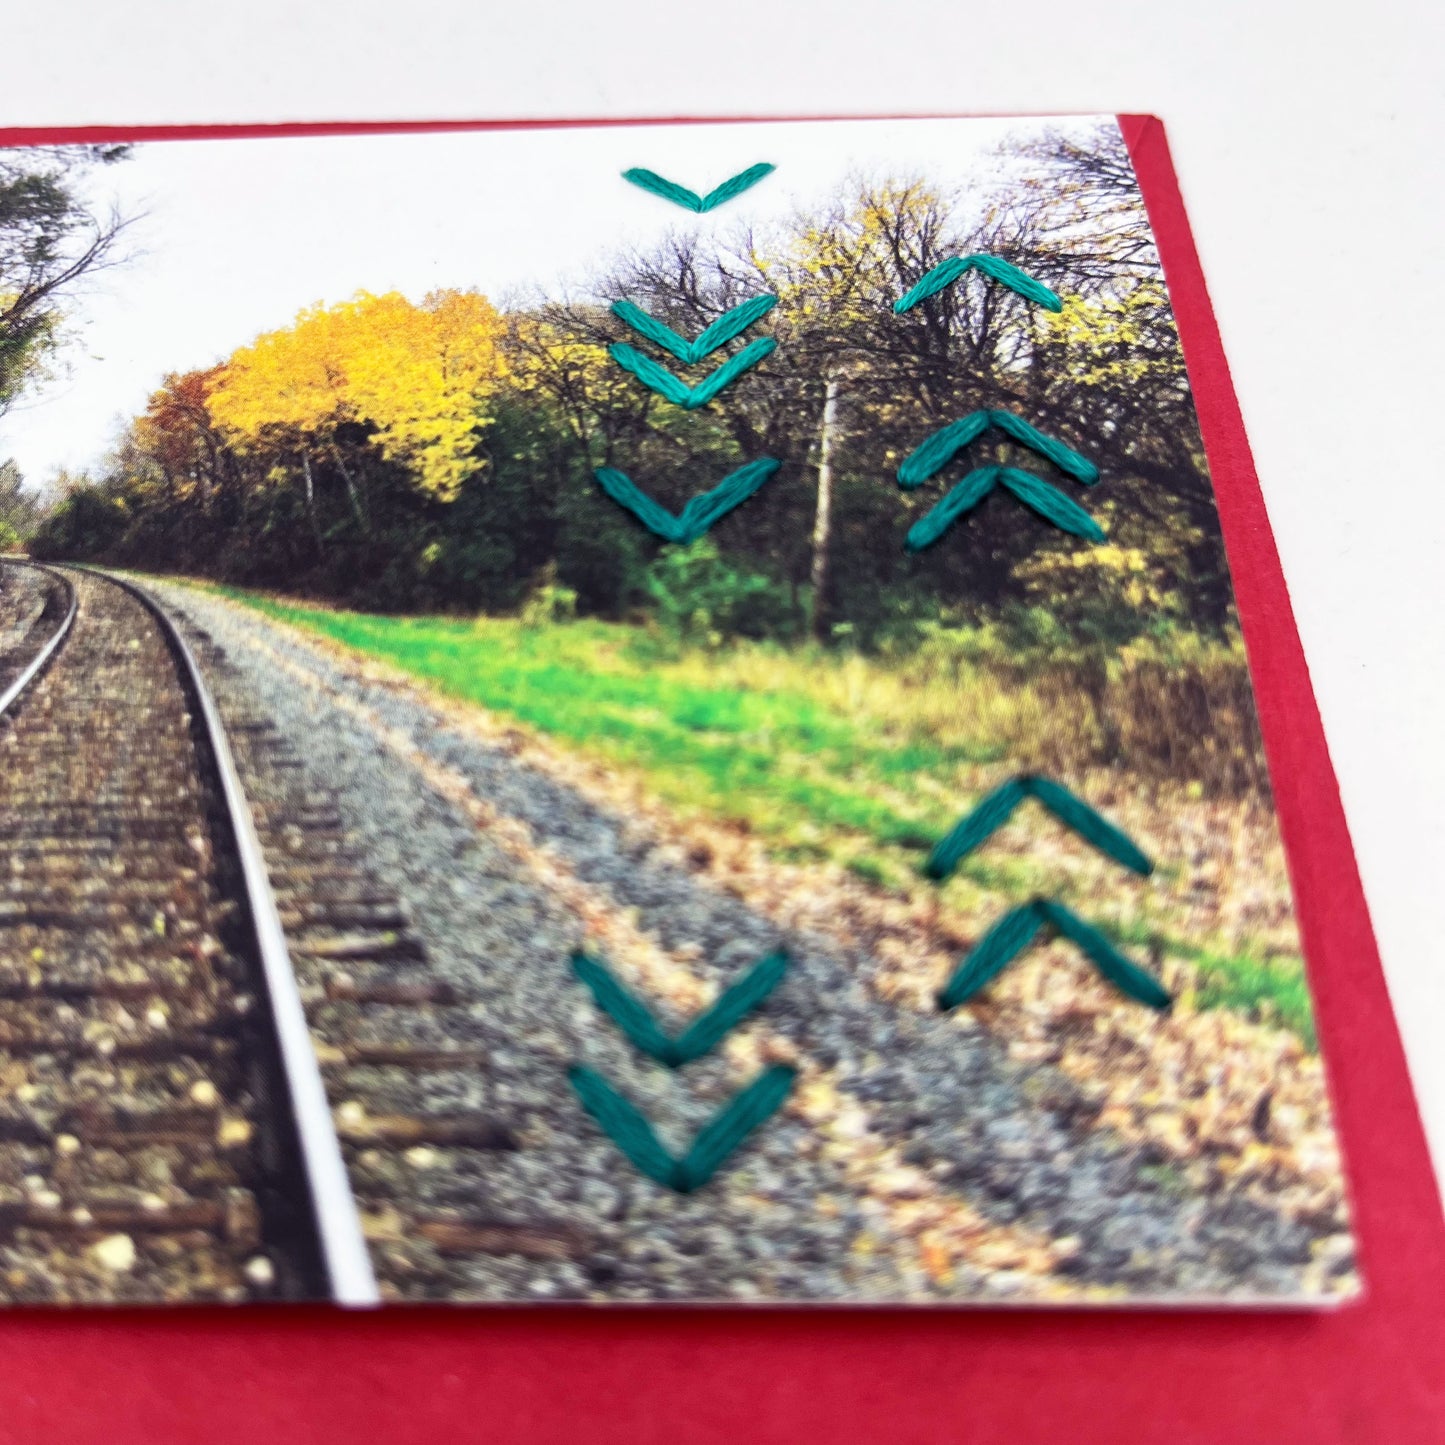 Greeting card flat on an envelope. Photo of a path through the woods in fall. Rows of aqua chevron stitches along right side card